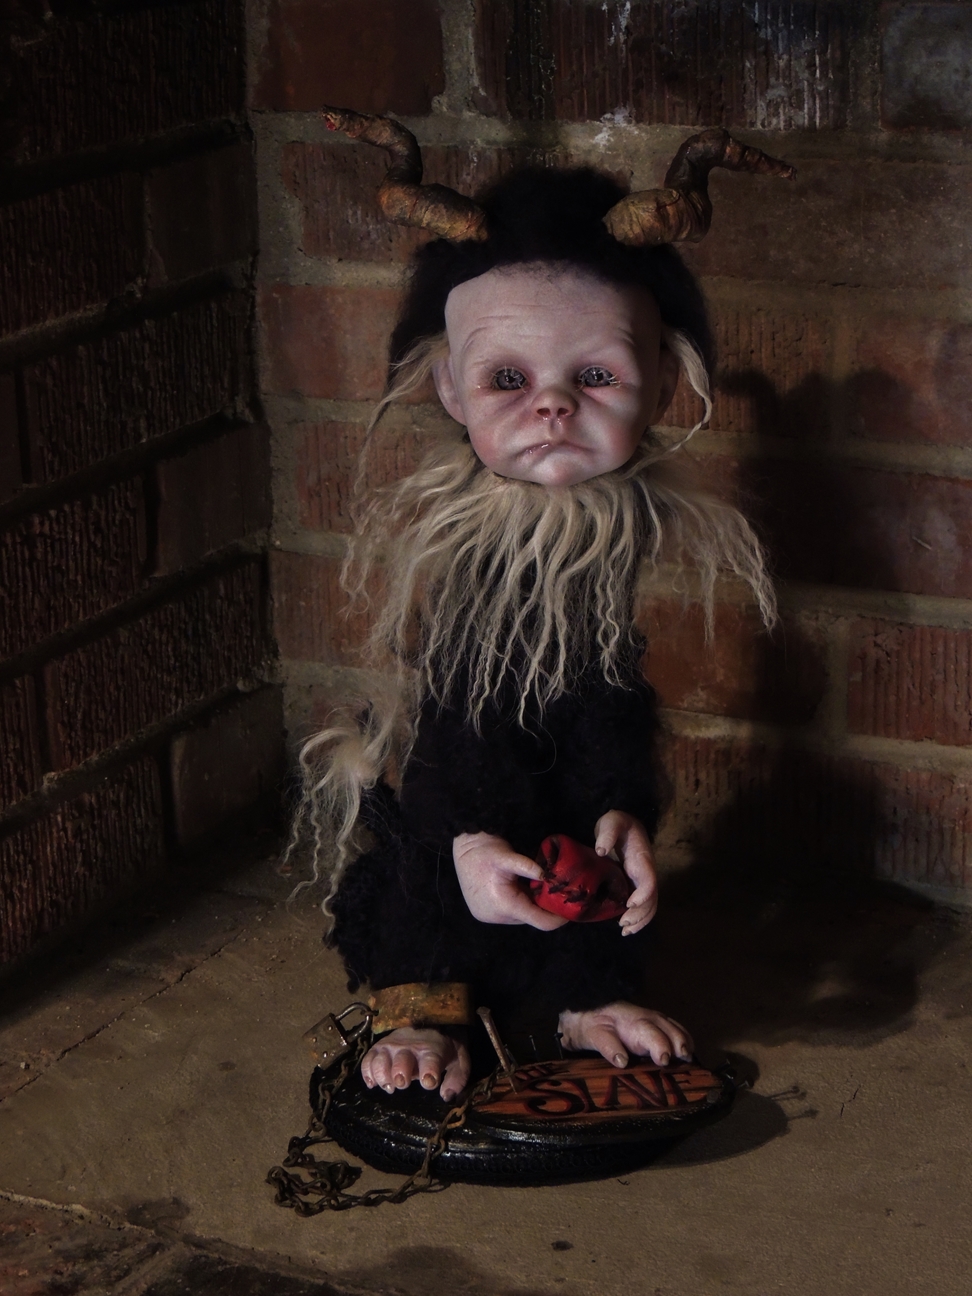 mixed media artdoll has hand-painted vinyl dollhead scrunched face with hand-sculpted horns, covered in black mohair fur, holds his heart in his hands